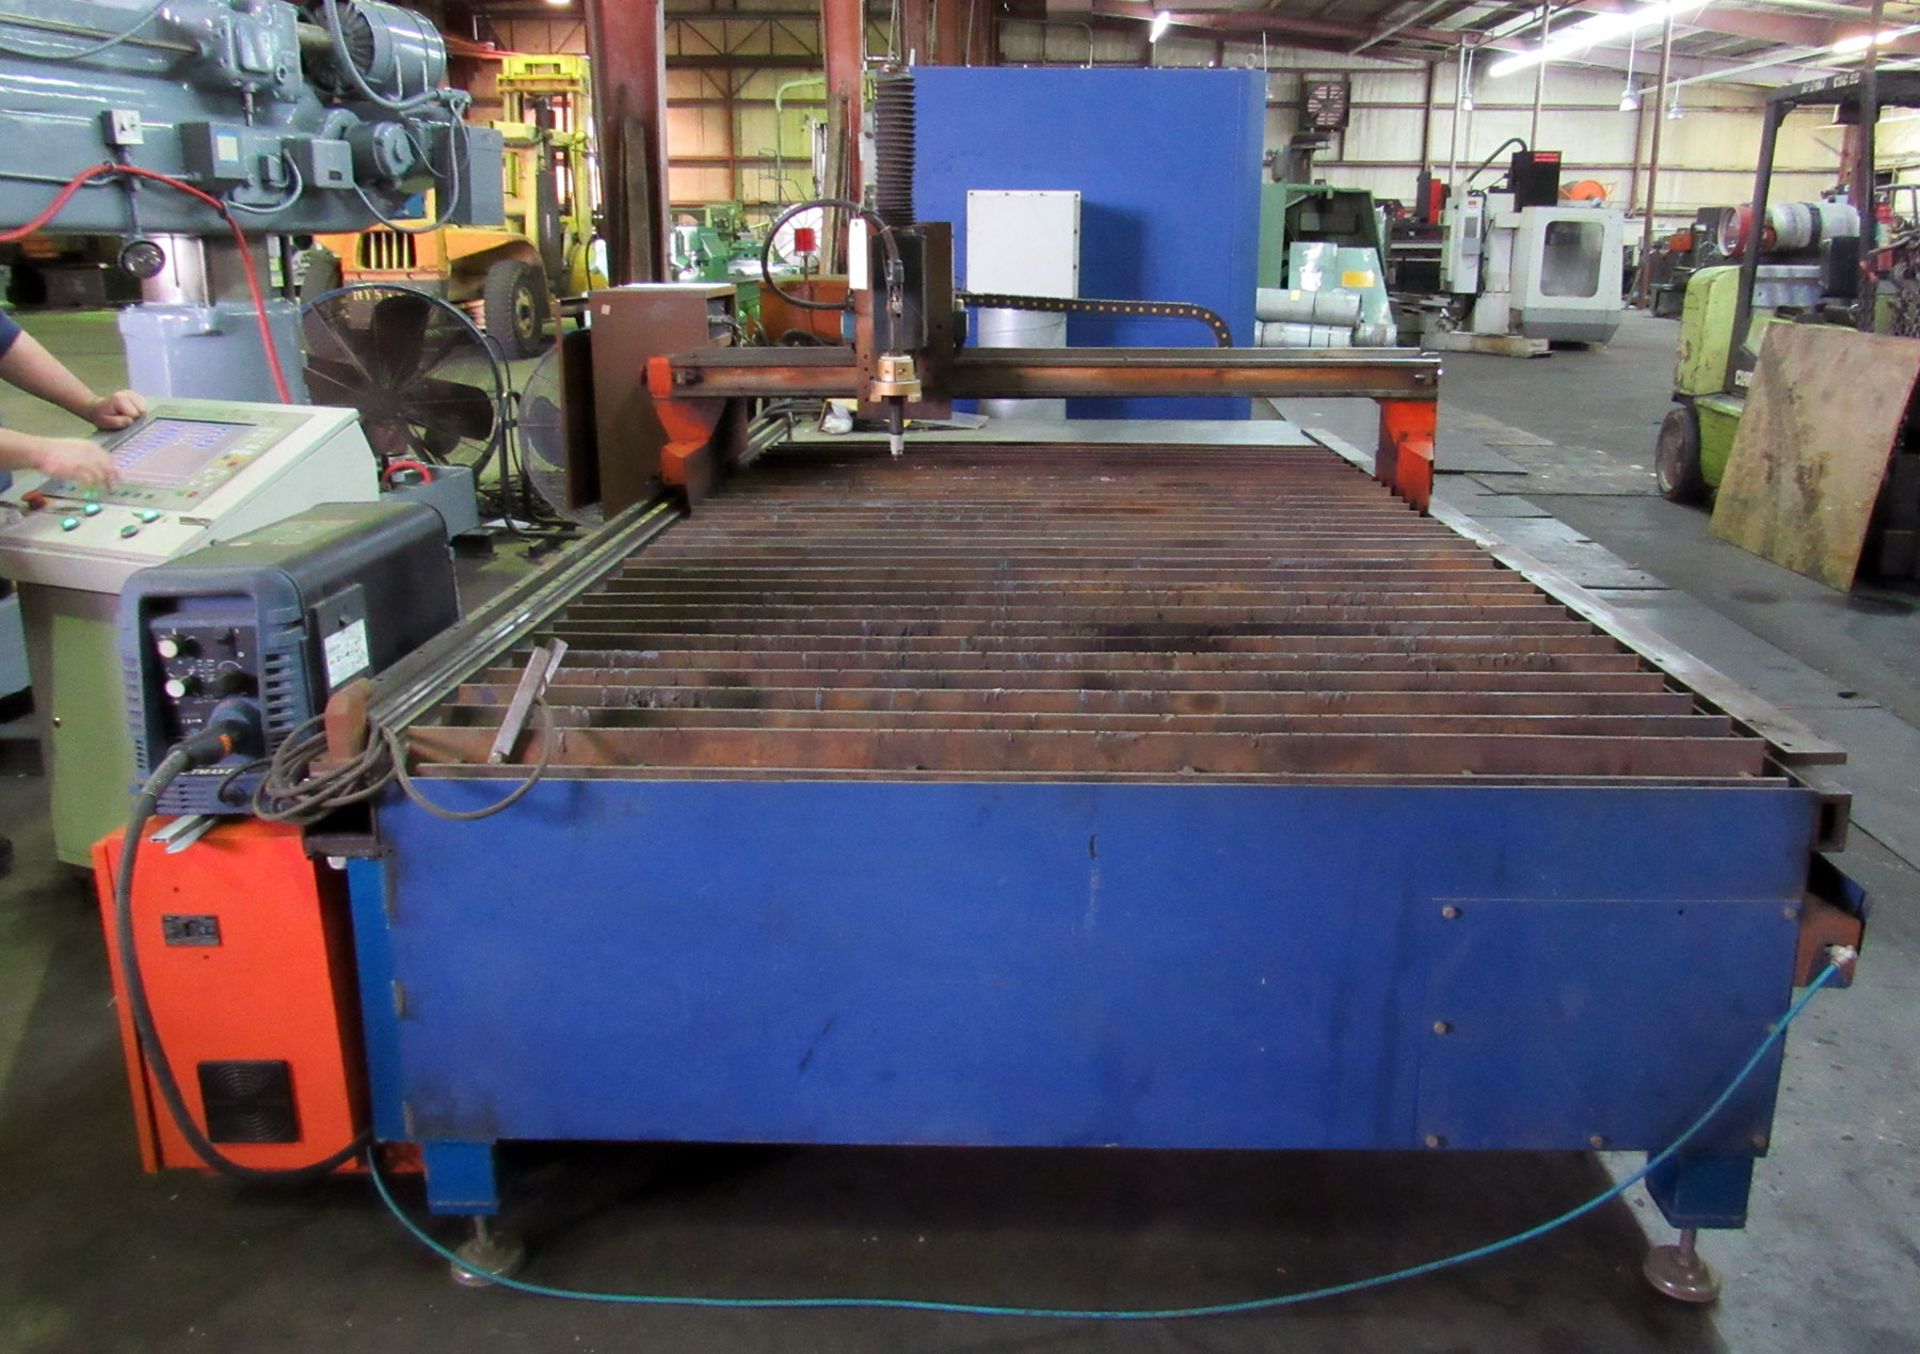 5' x 10' Vanguard CNC Plasma Cutting Machine with Dust Collector - Image 3 of 7